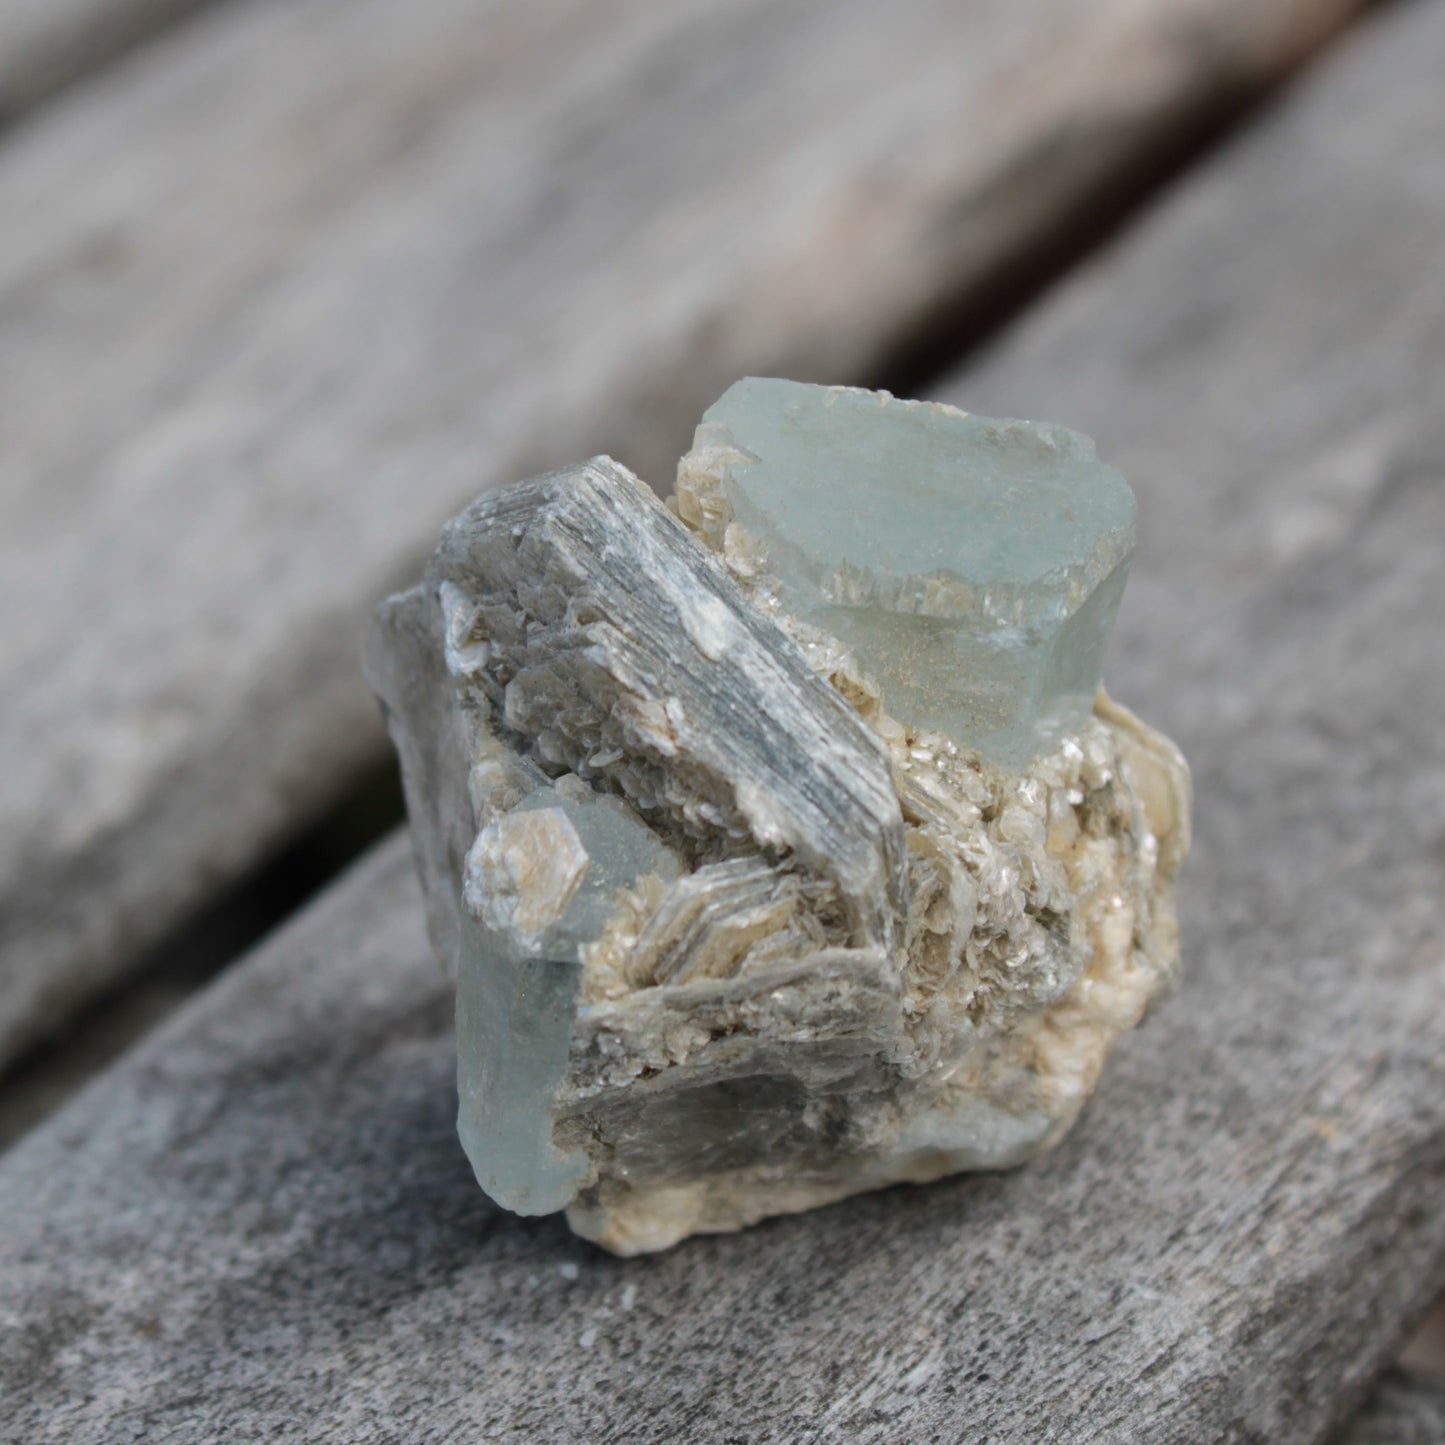 Blue Aquamarine terminated crystals in mica from Afghanistan 29.2g